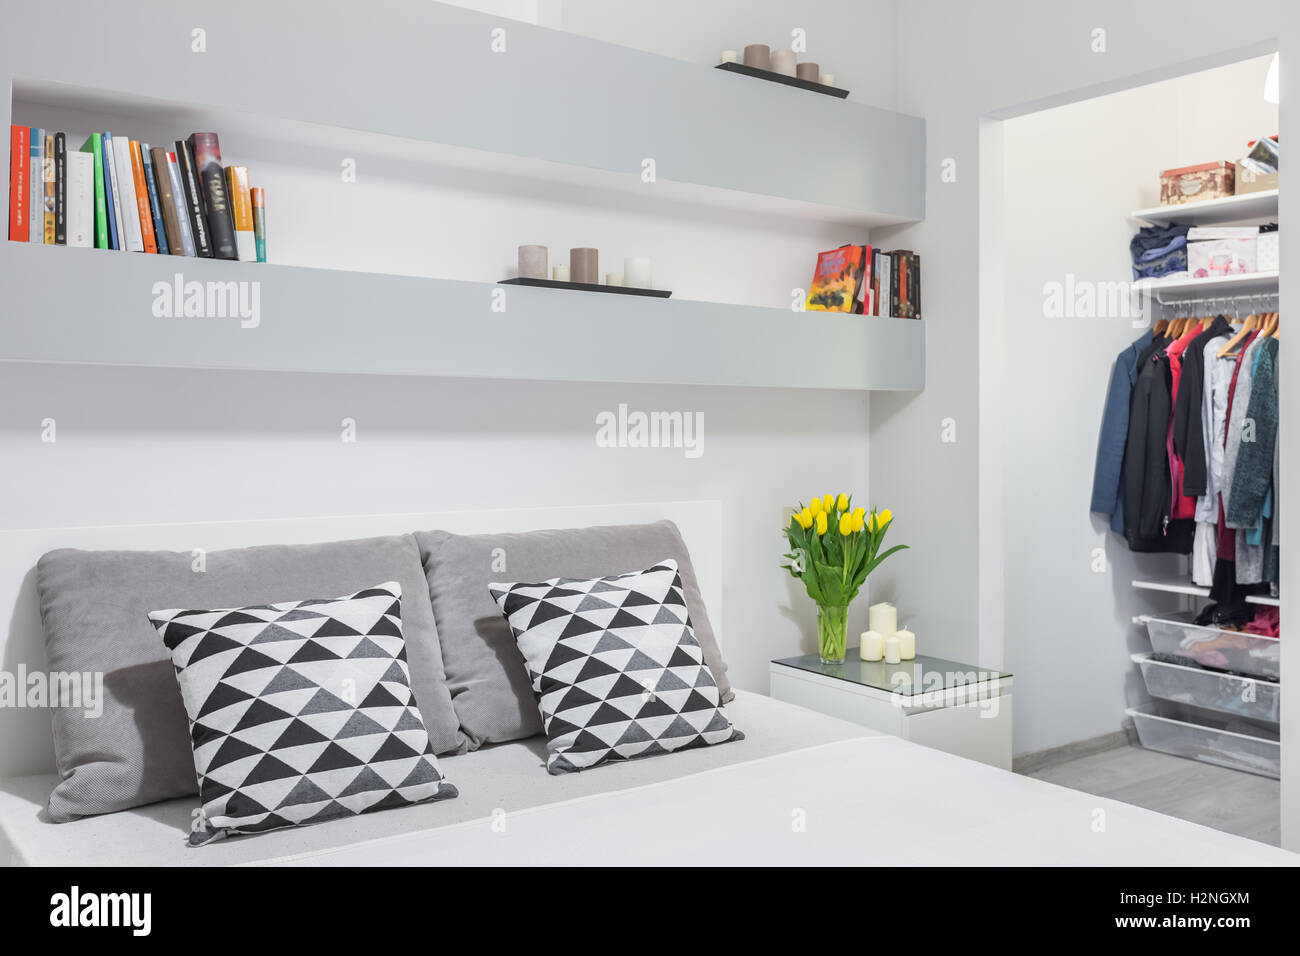 New bedroom in grey and white with double bed and walk in wardrobe Stock Photo